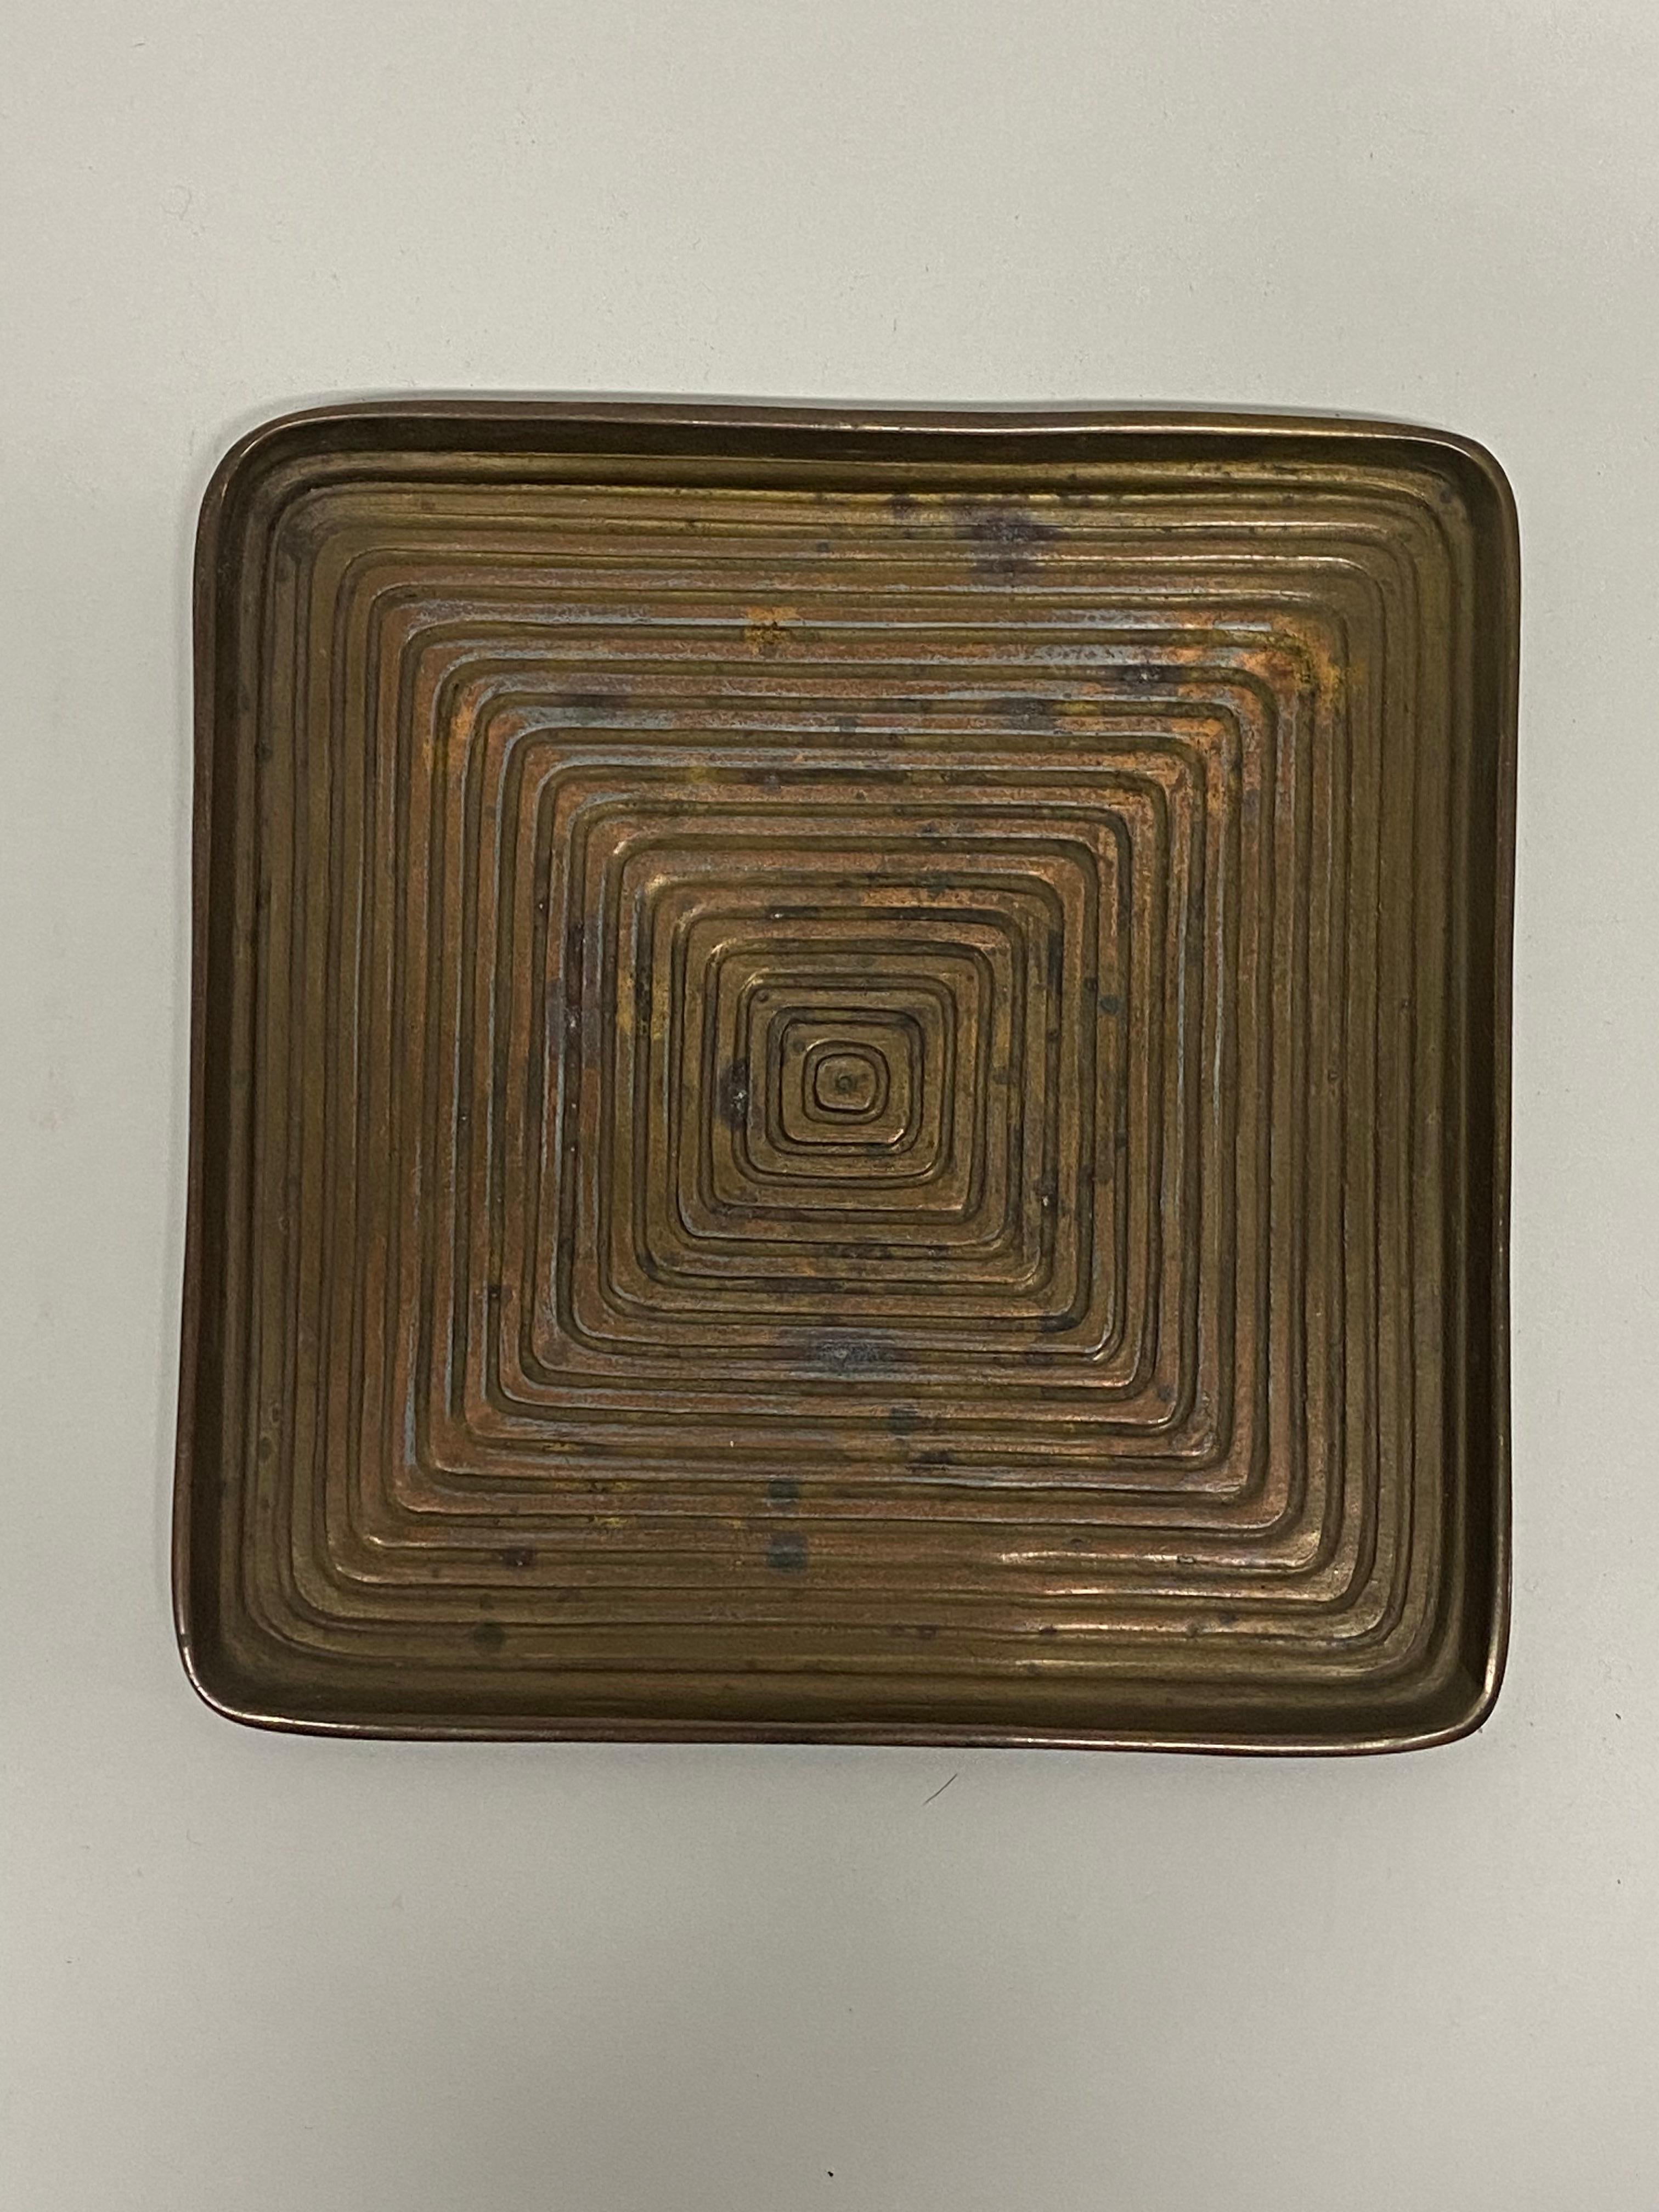 Cast metal concentric square dish designed by Ben Seibel for Jenfred. Circa 1950. Seibel creates a nice optical maze of ever enlarging concentric squares. Good overall condition with minor oxidation and verdi gris patina. Minor cosmetic and surface